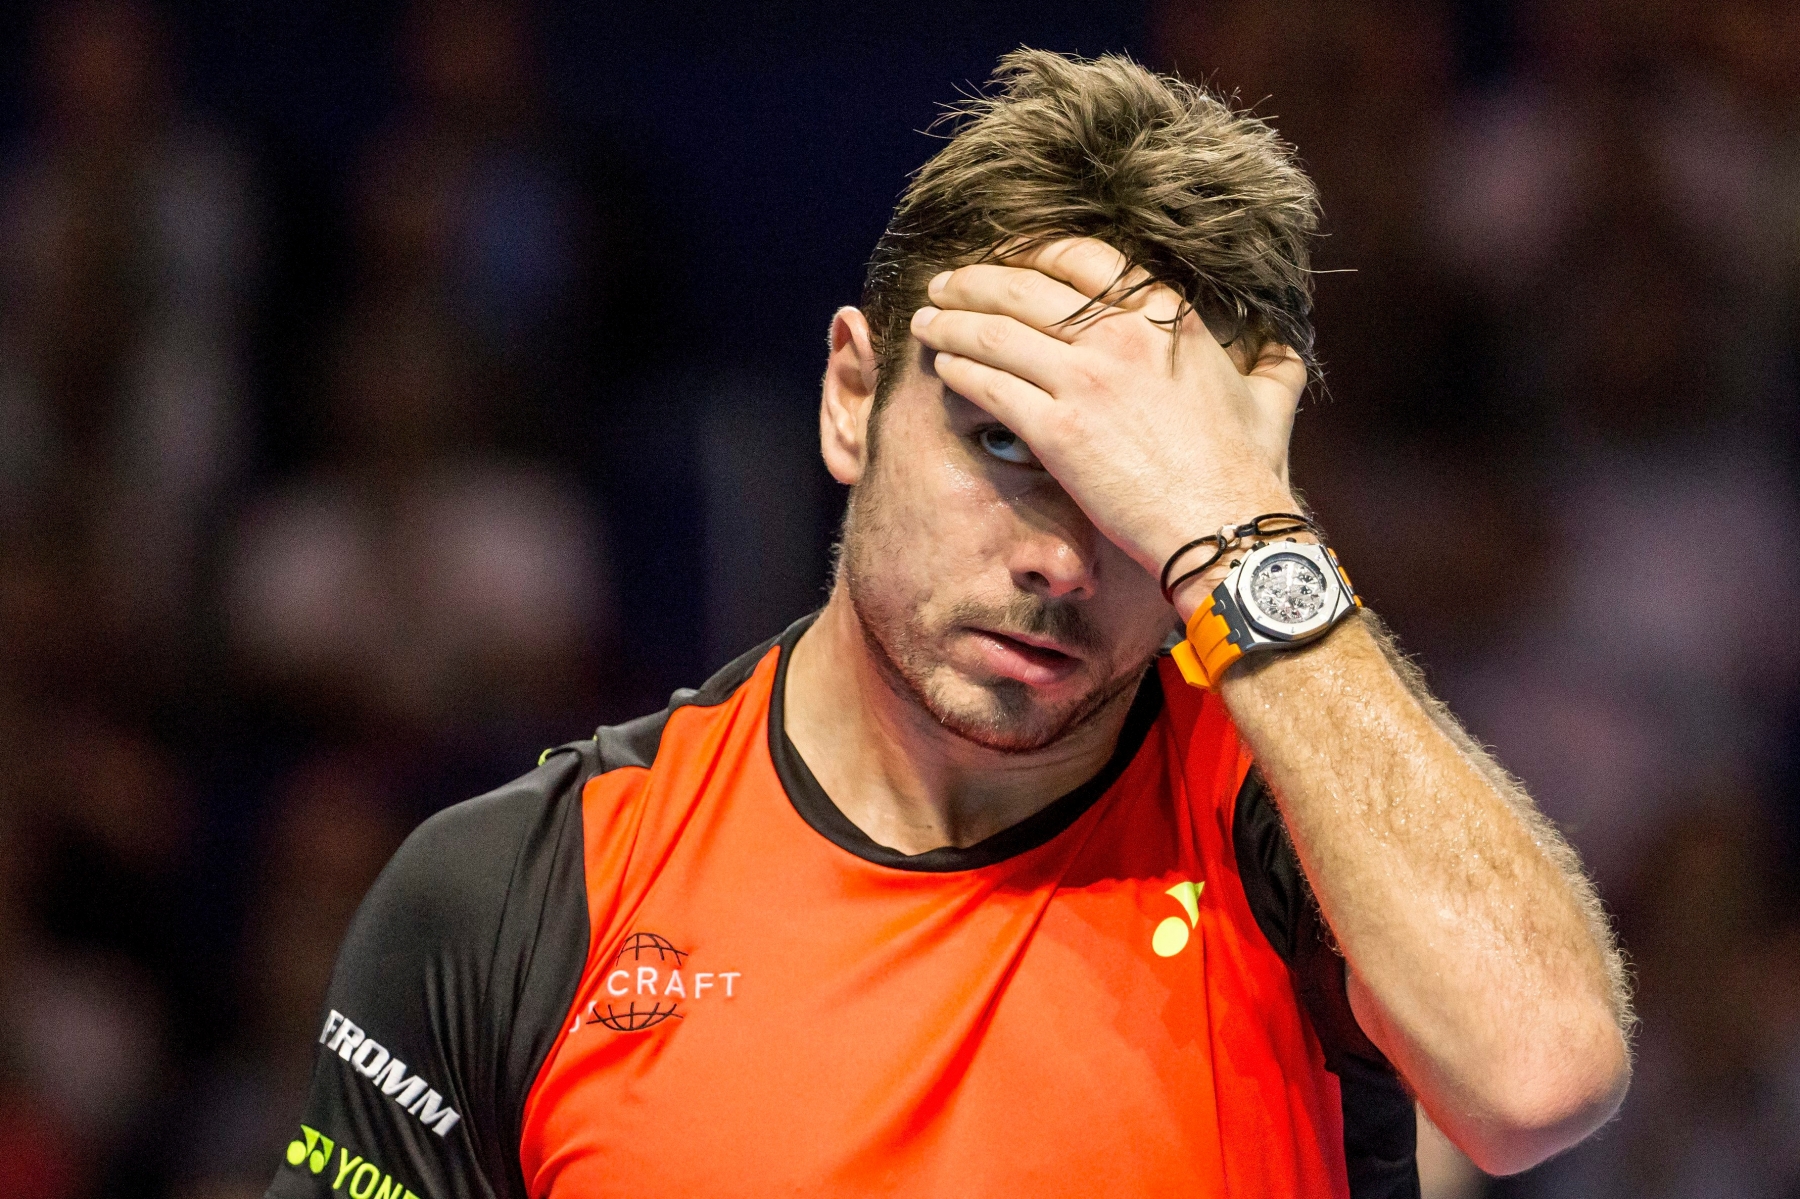 Switzerland's Stan Wawrinka during his quarter final match against Germany's Alexander Zverev, at the Swiss Indoors tennis tournament at the St. Jakobshalle in Basel, Switzerland, on Friday, October 28, 2016. (KEYSTONE/Alexandra Wey)
 TENNIS ATP 500 WORLD TOUR 2016 BASEL